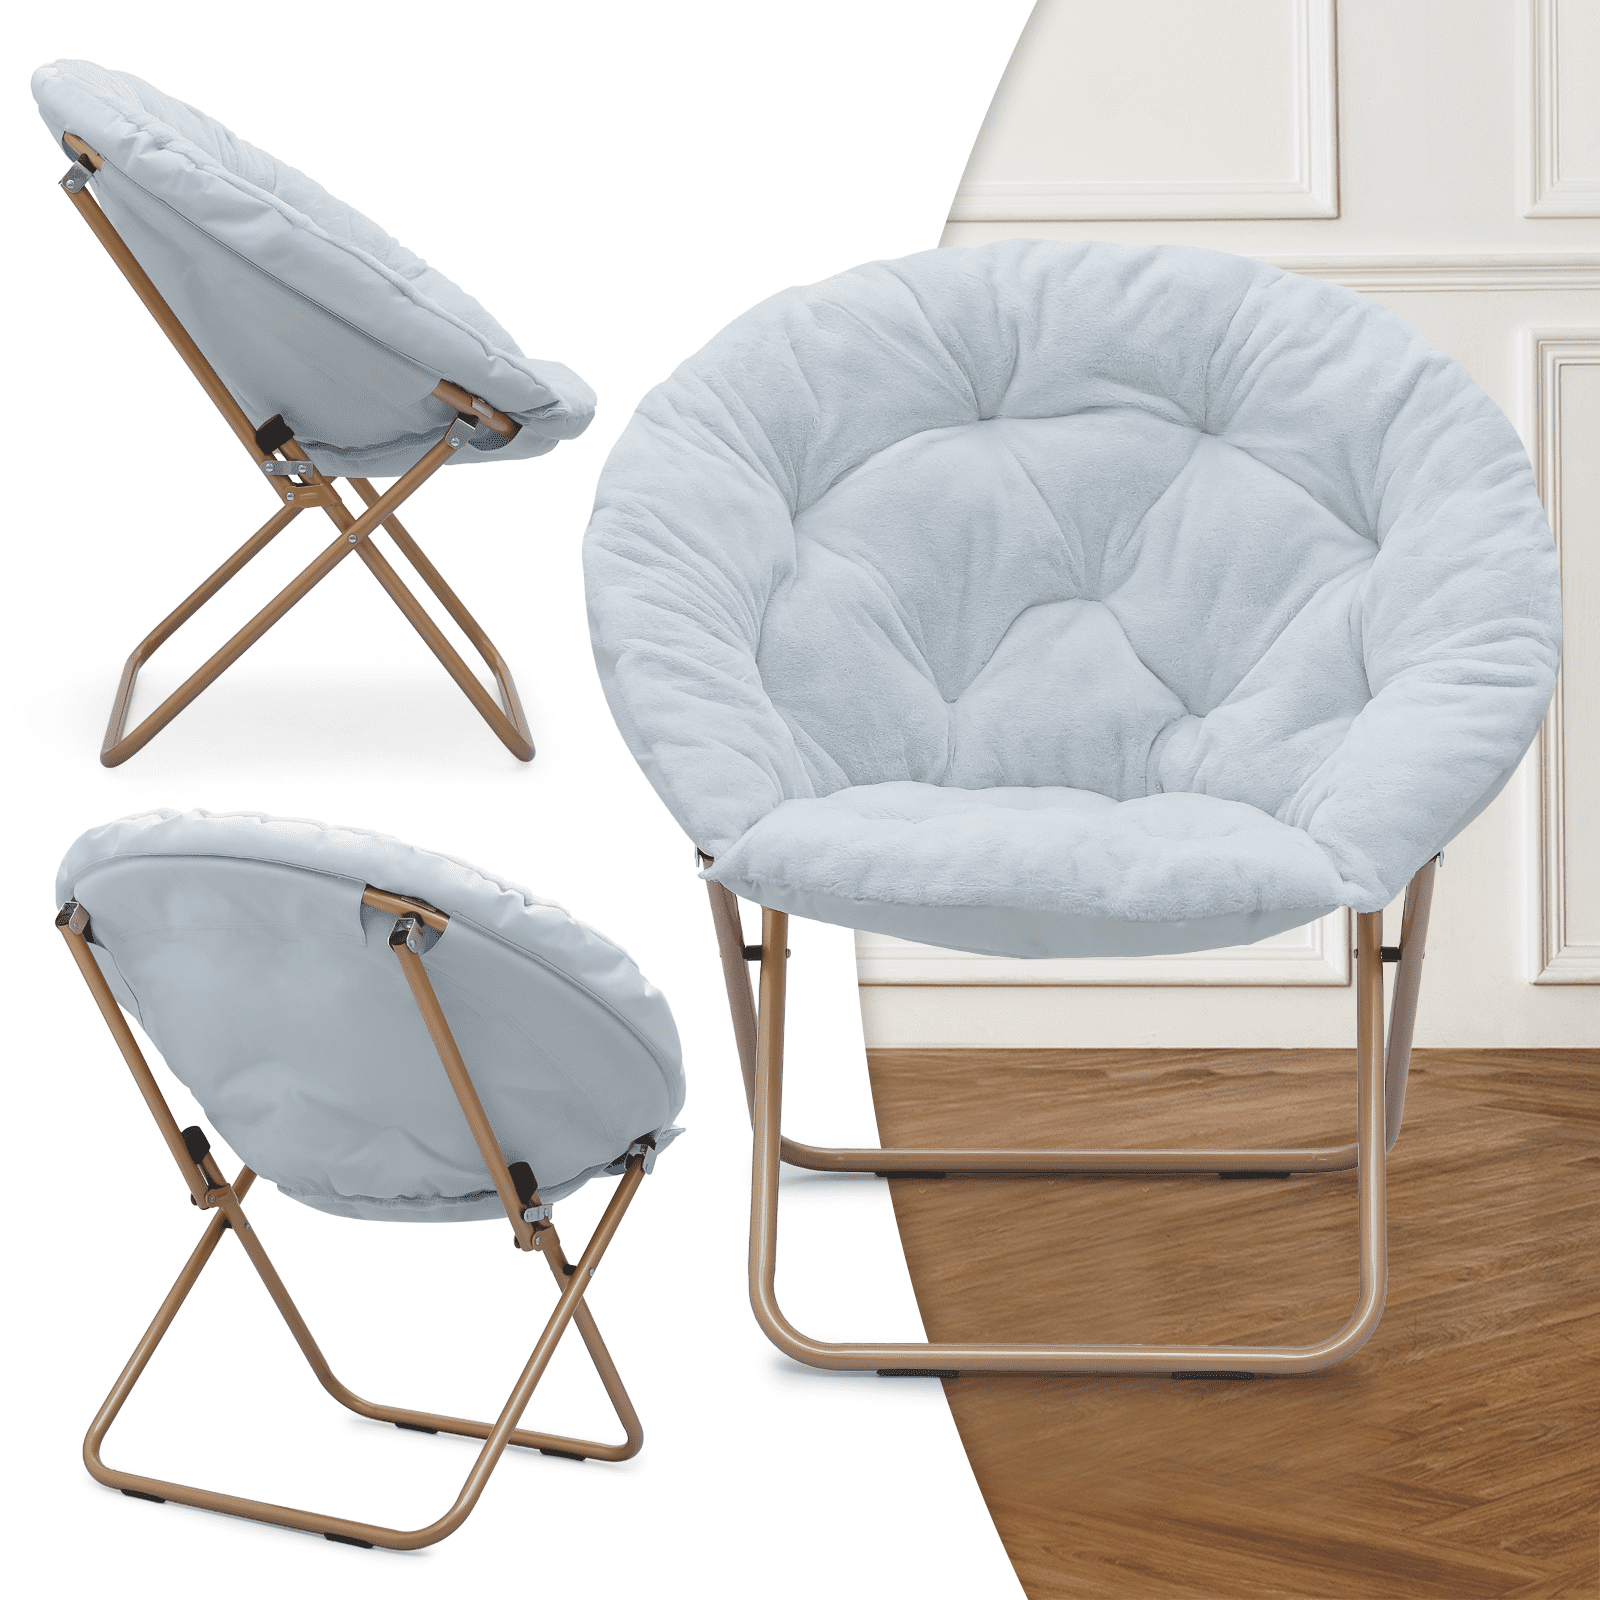 MoNiBloom Set of 2 Folding Saucer Chair for Adult, Oversized Round Cozy  Moon Chair for Kids Boys Girls, Metal Frame Lounge Chair for Bedroom, White